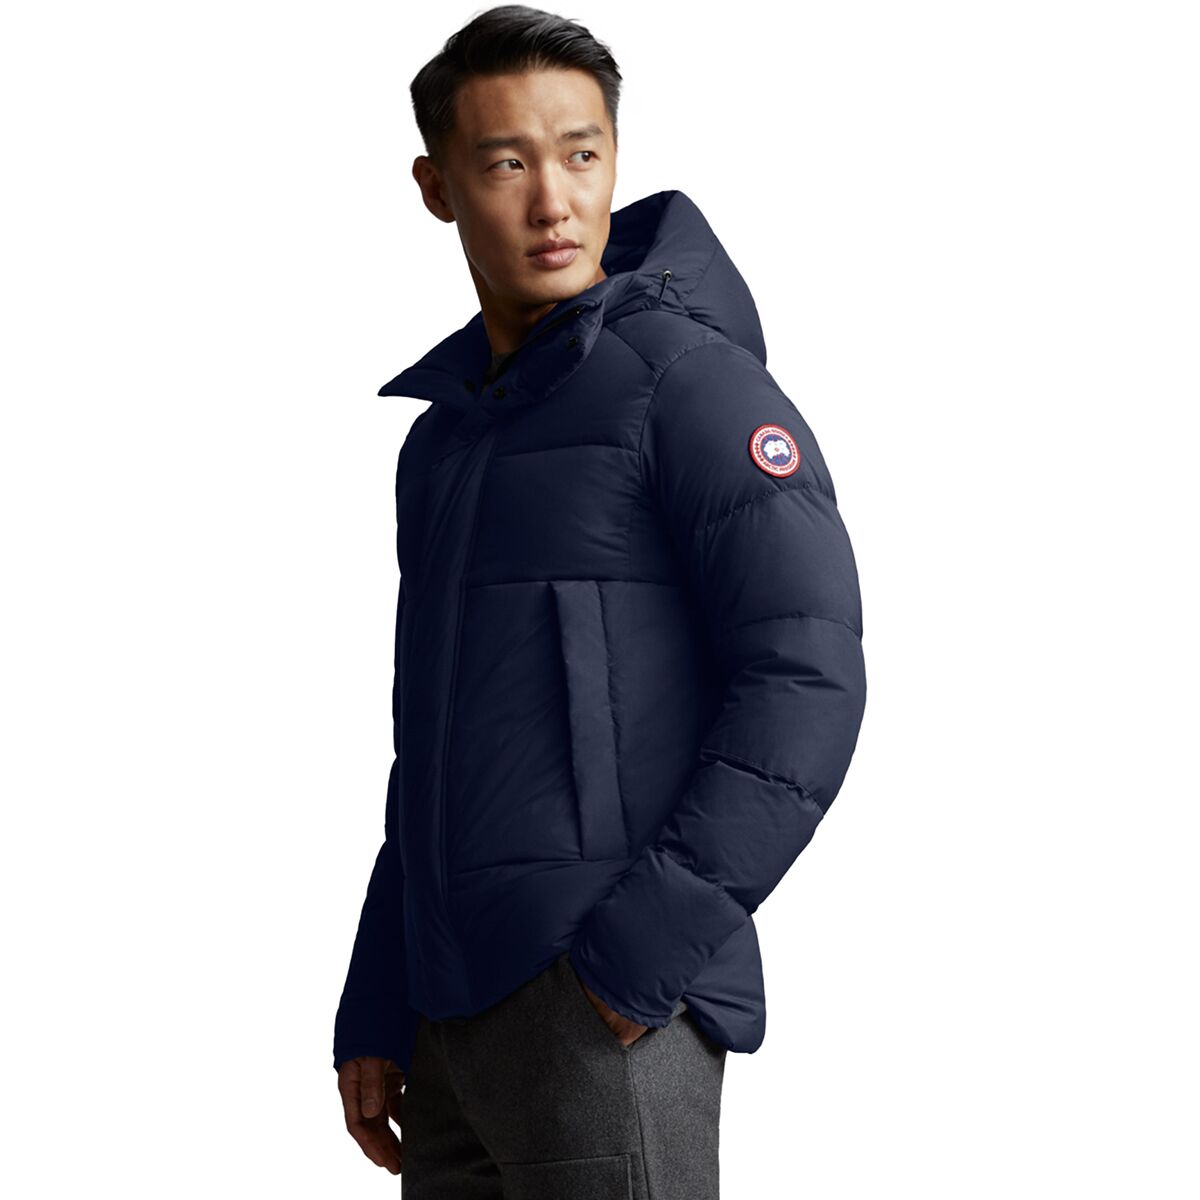 Canada Goose Armstrong Hooded Jacket - Men's